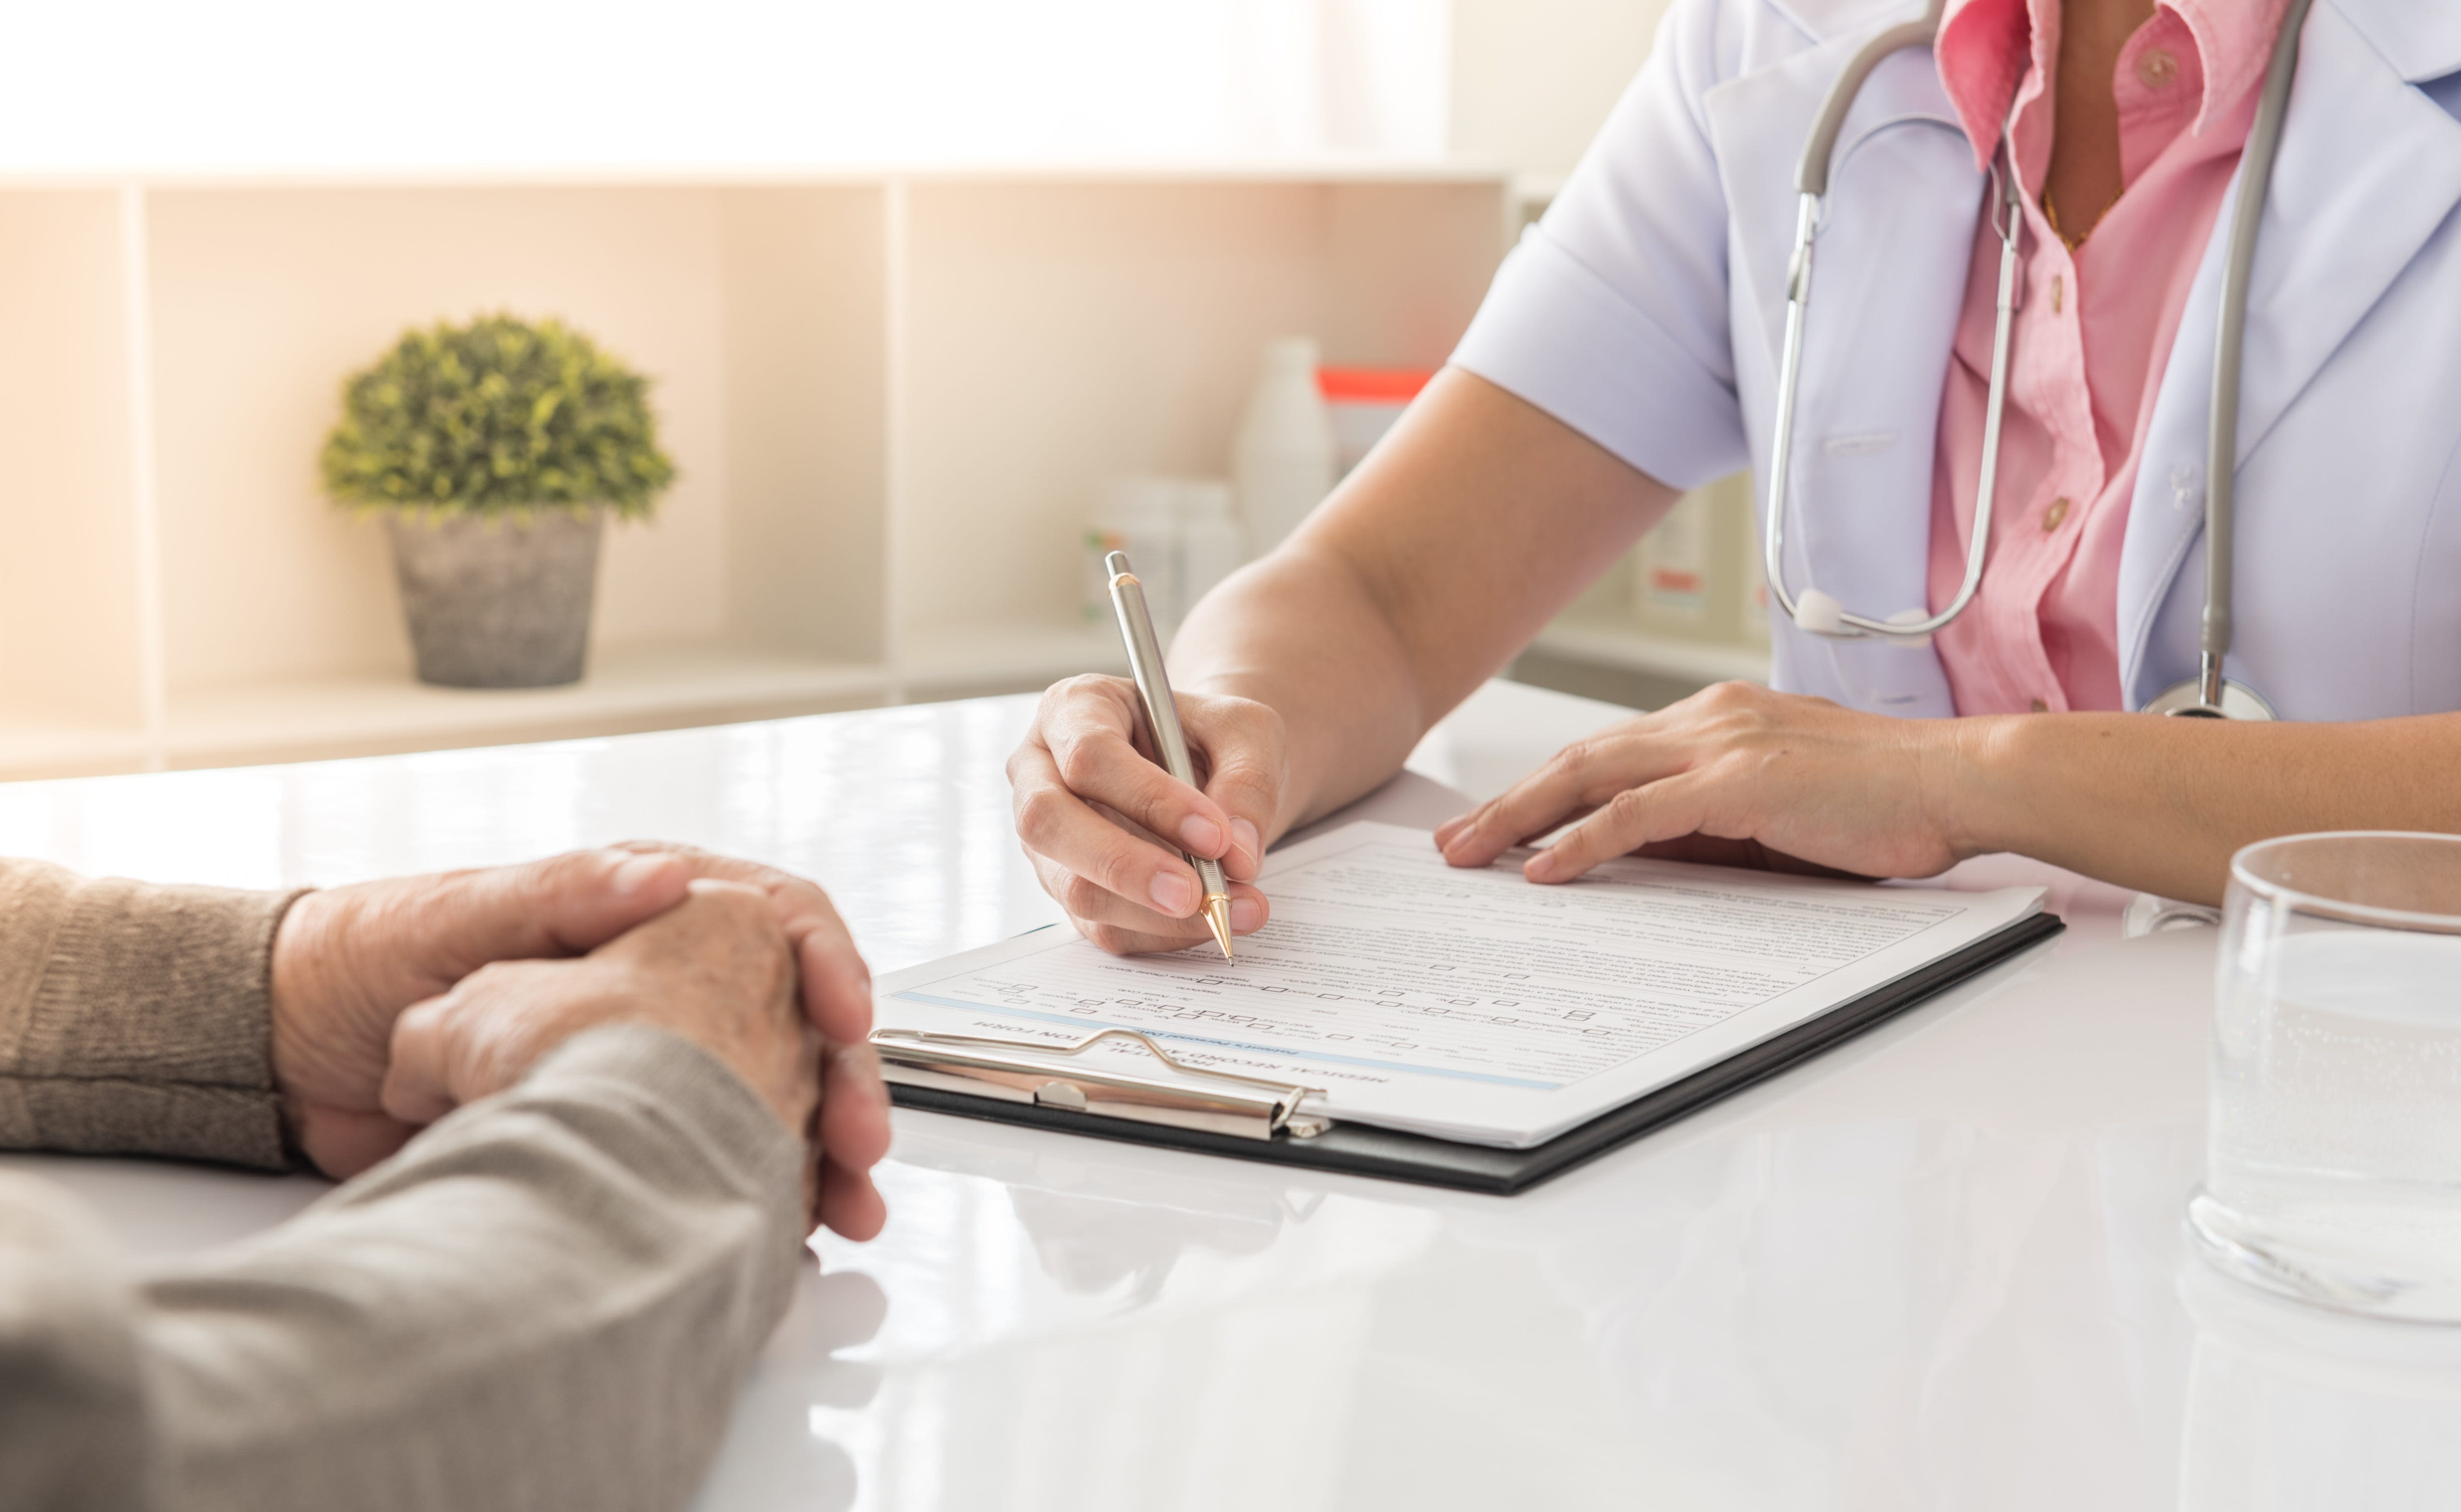 Oklahoma physicians have been overburdened with prior authorization for patient care. New law changes that